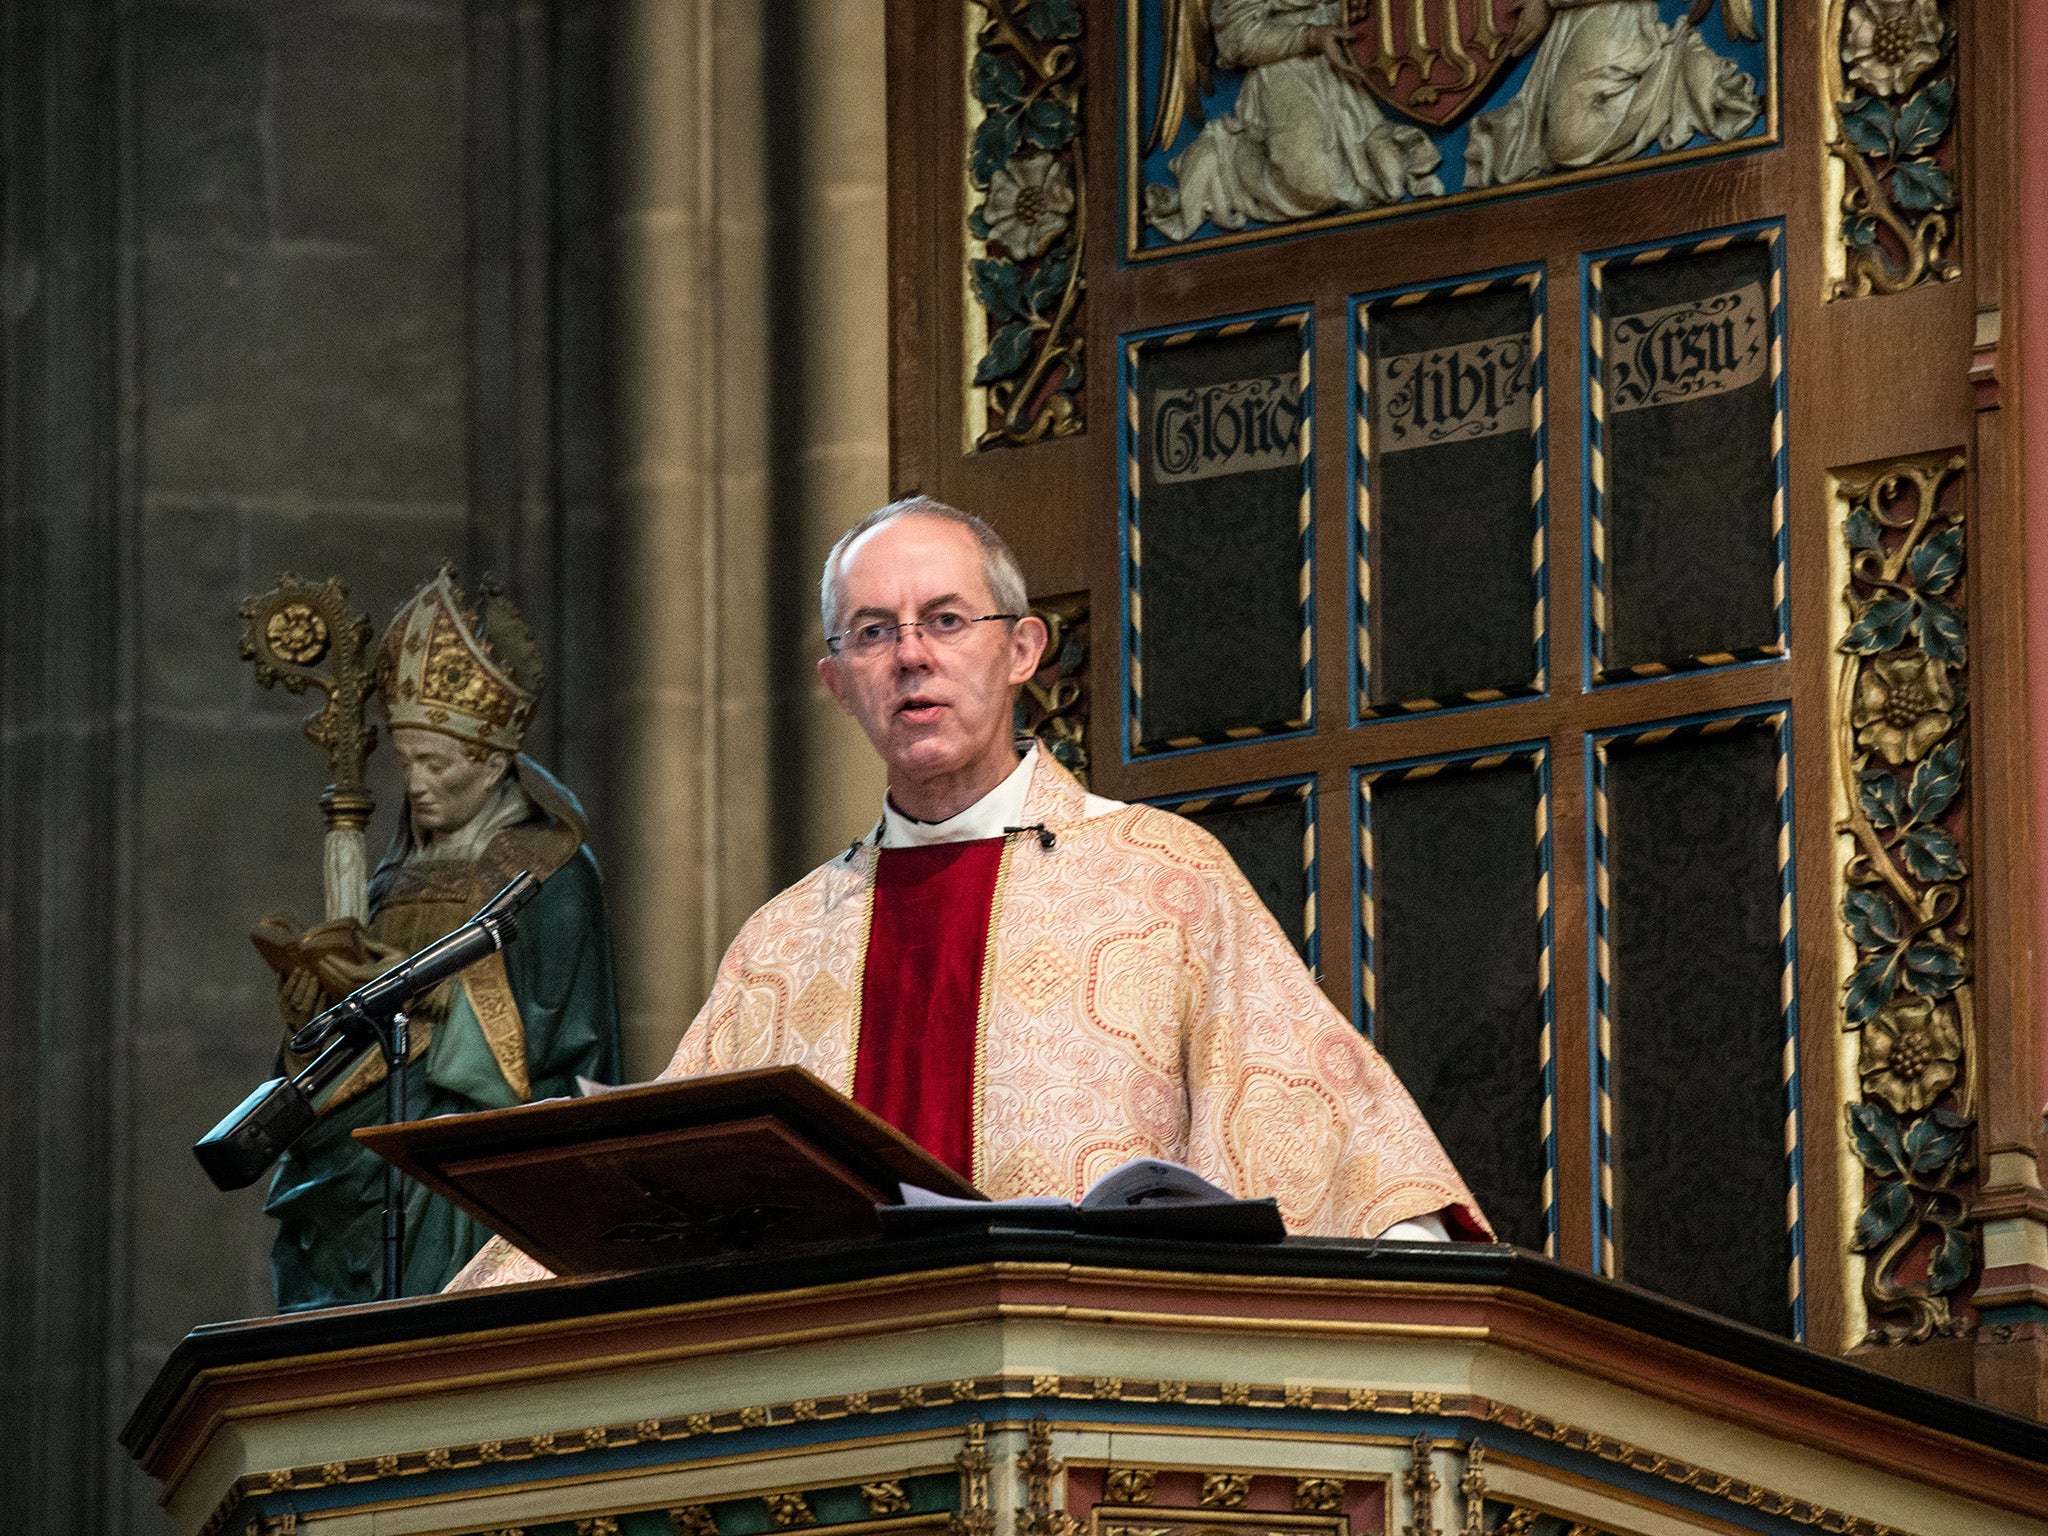 The Archbishop of Canterbury, Justin Welby, might be surprised to learn his congregation is shunning conventional religious beliefs